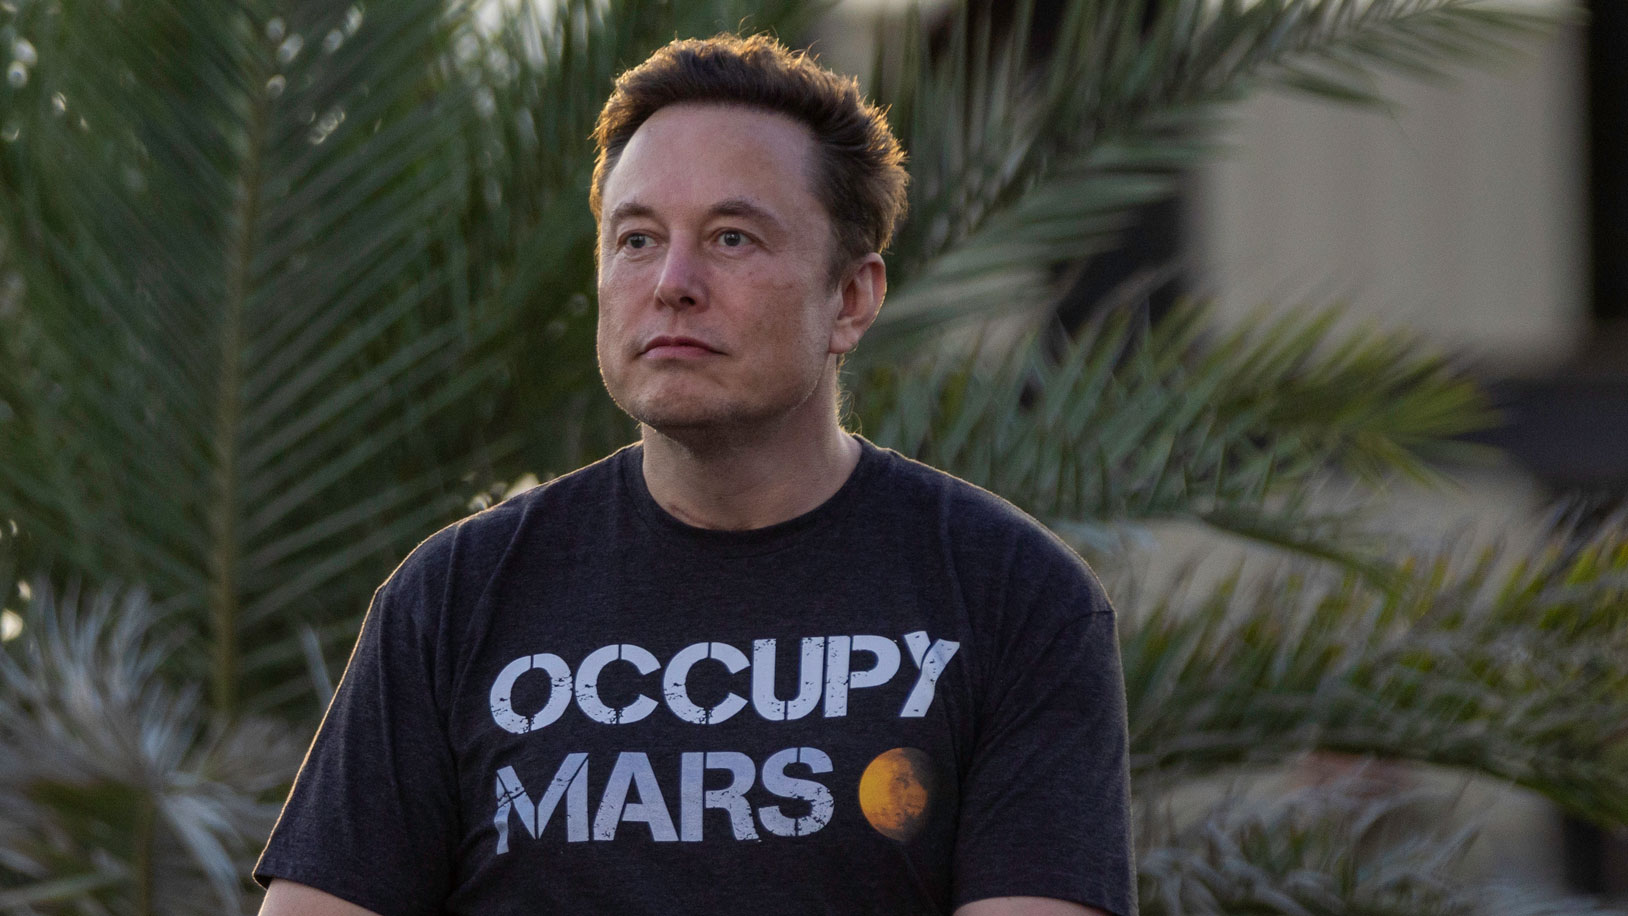 SpaceX founder Elon Musk during a T-Mobile and SpaceX joint event on August 25, 2022 in Boca Chica Beach, Texas